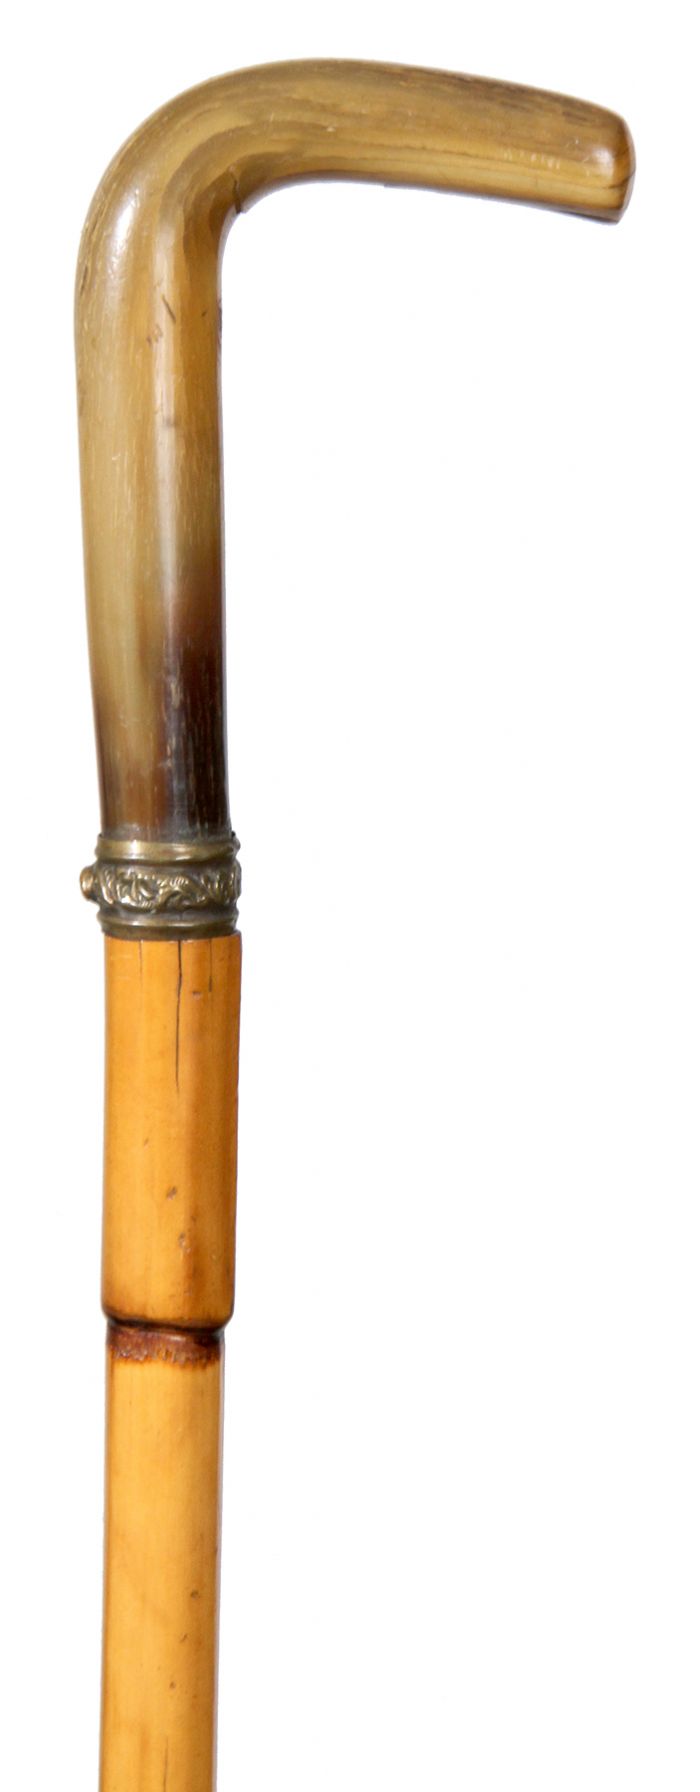 Henry Marder Estate Cane Absolute Auction - 41.jpg